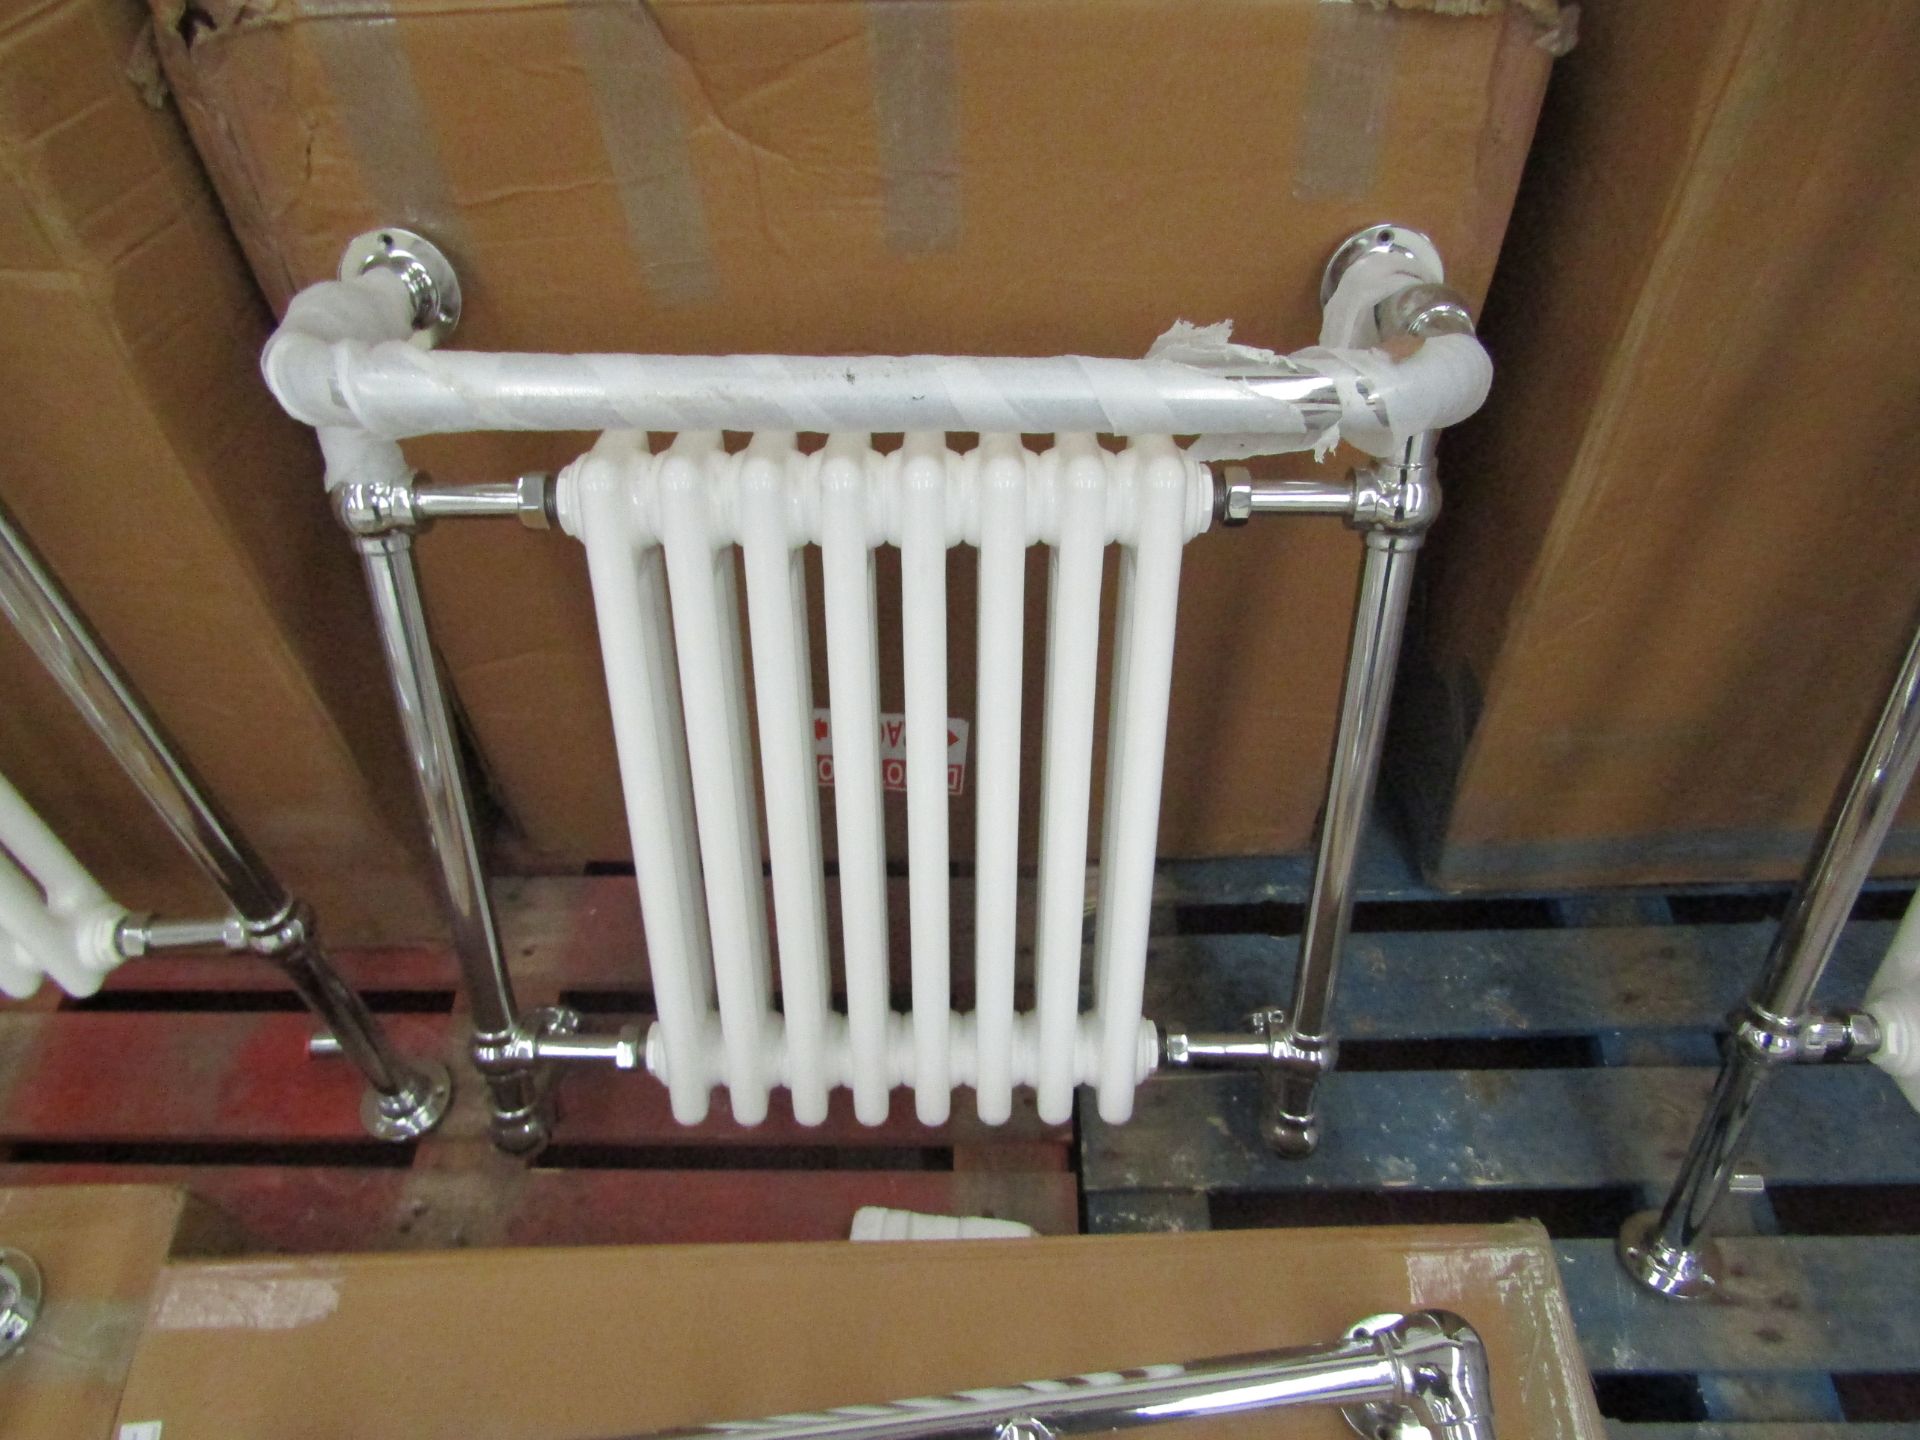 Old London 8 section wall mounted Traditional radiator, unchecked with box 63 x 64 x 24cm